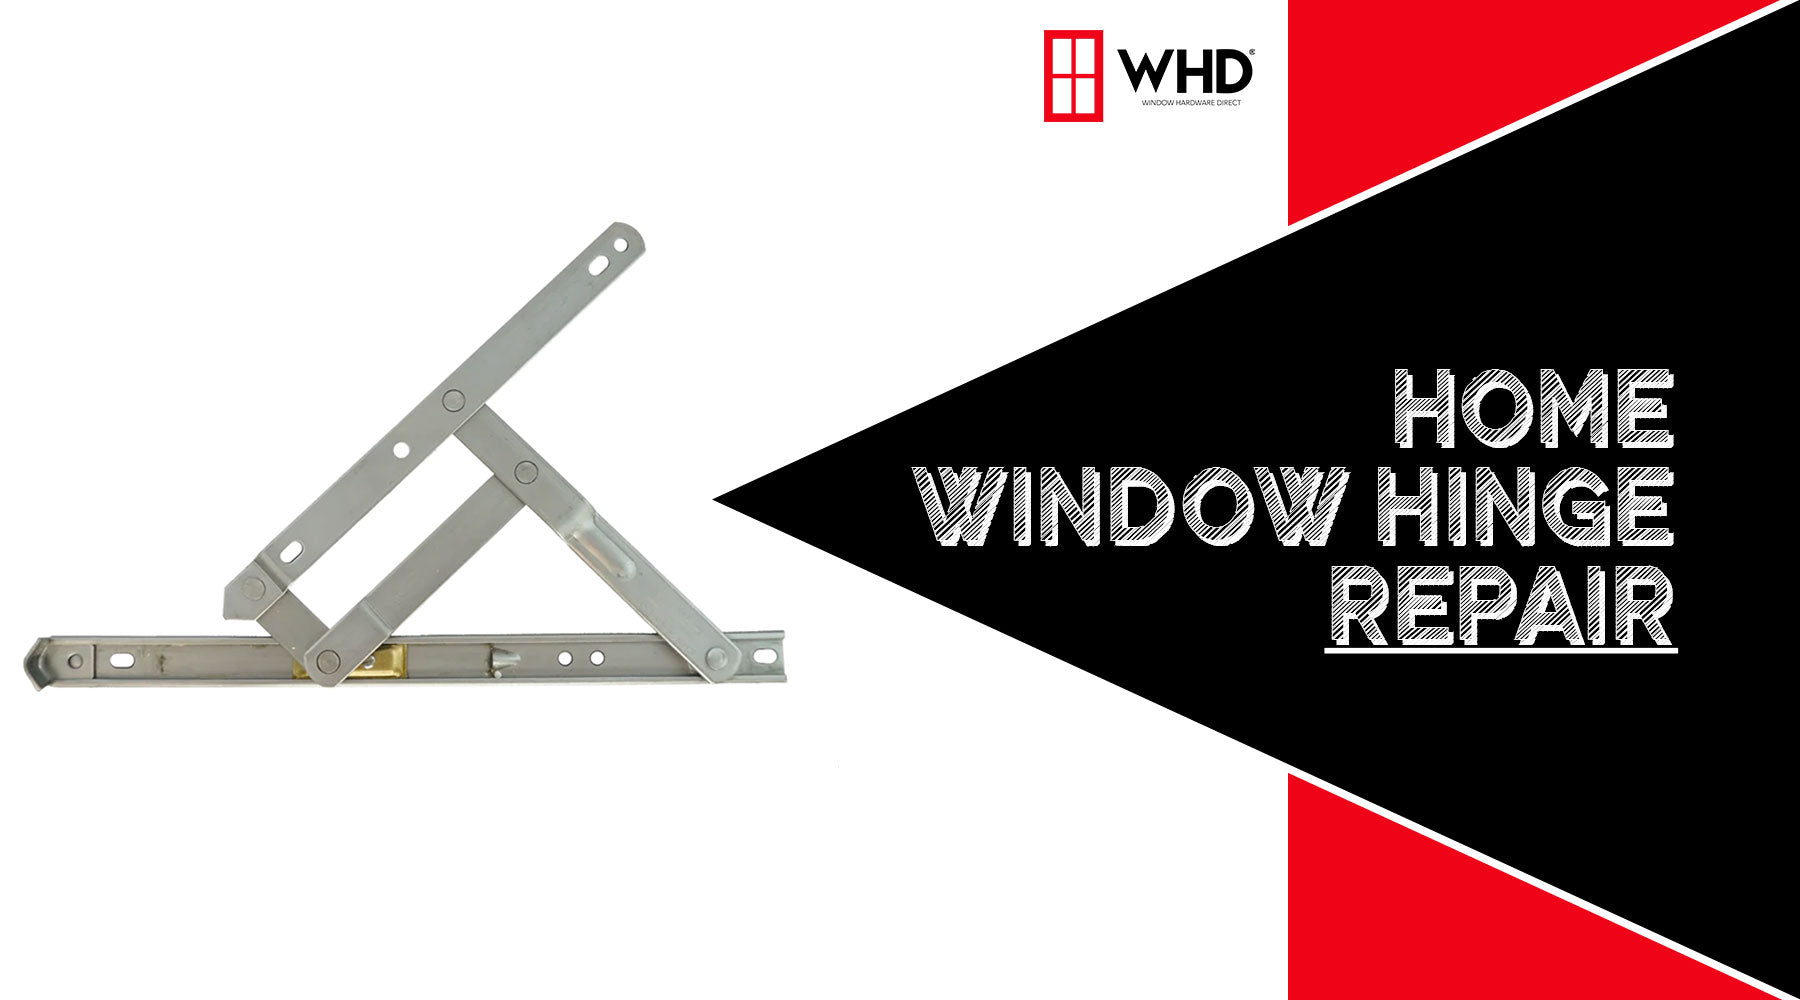 Home Window Hinge Repair: A Guide to Fixing Your Windows with Ease